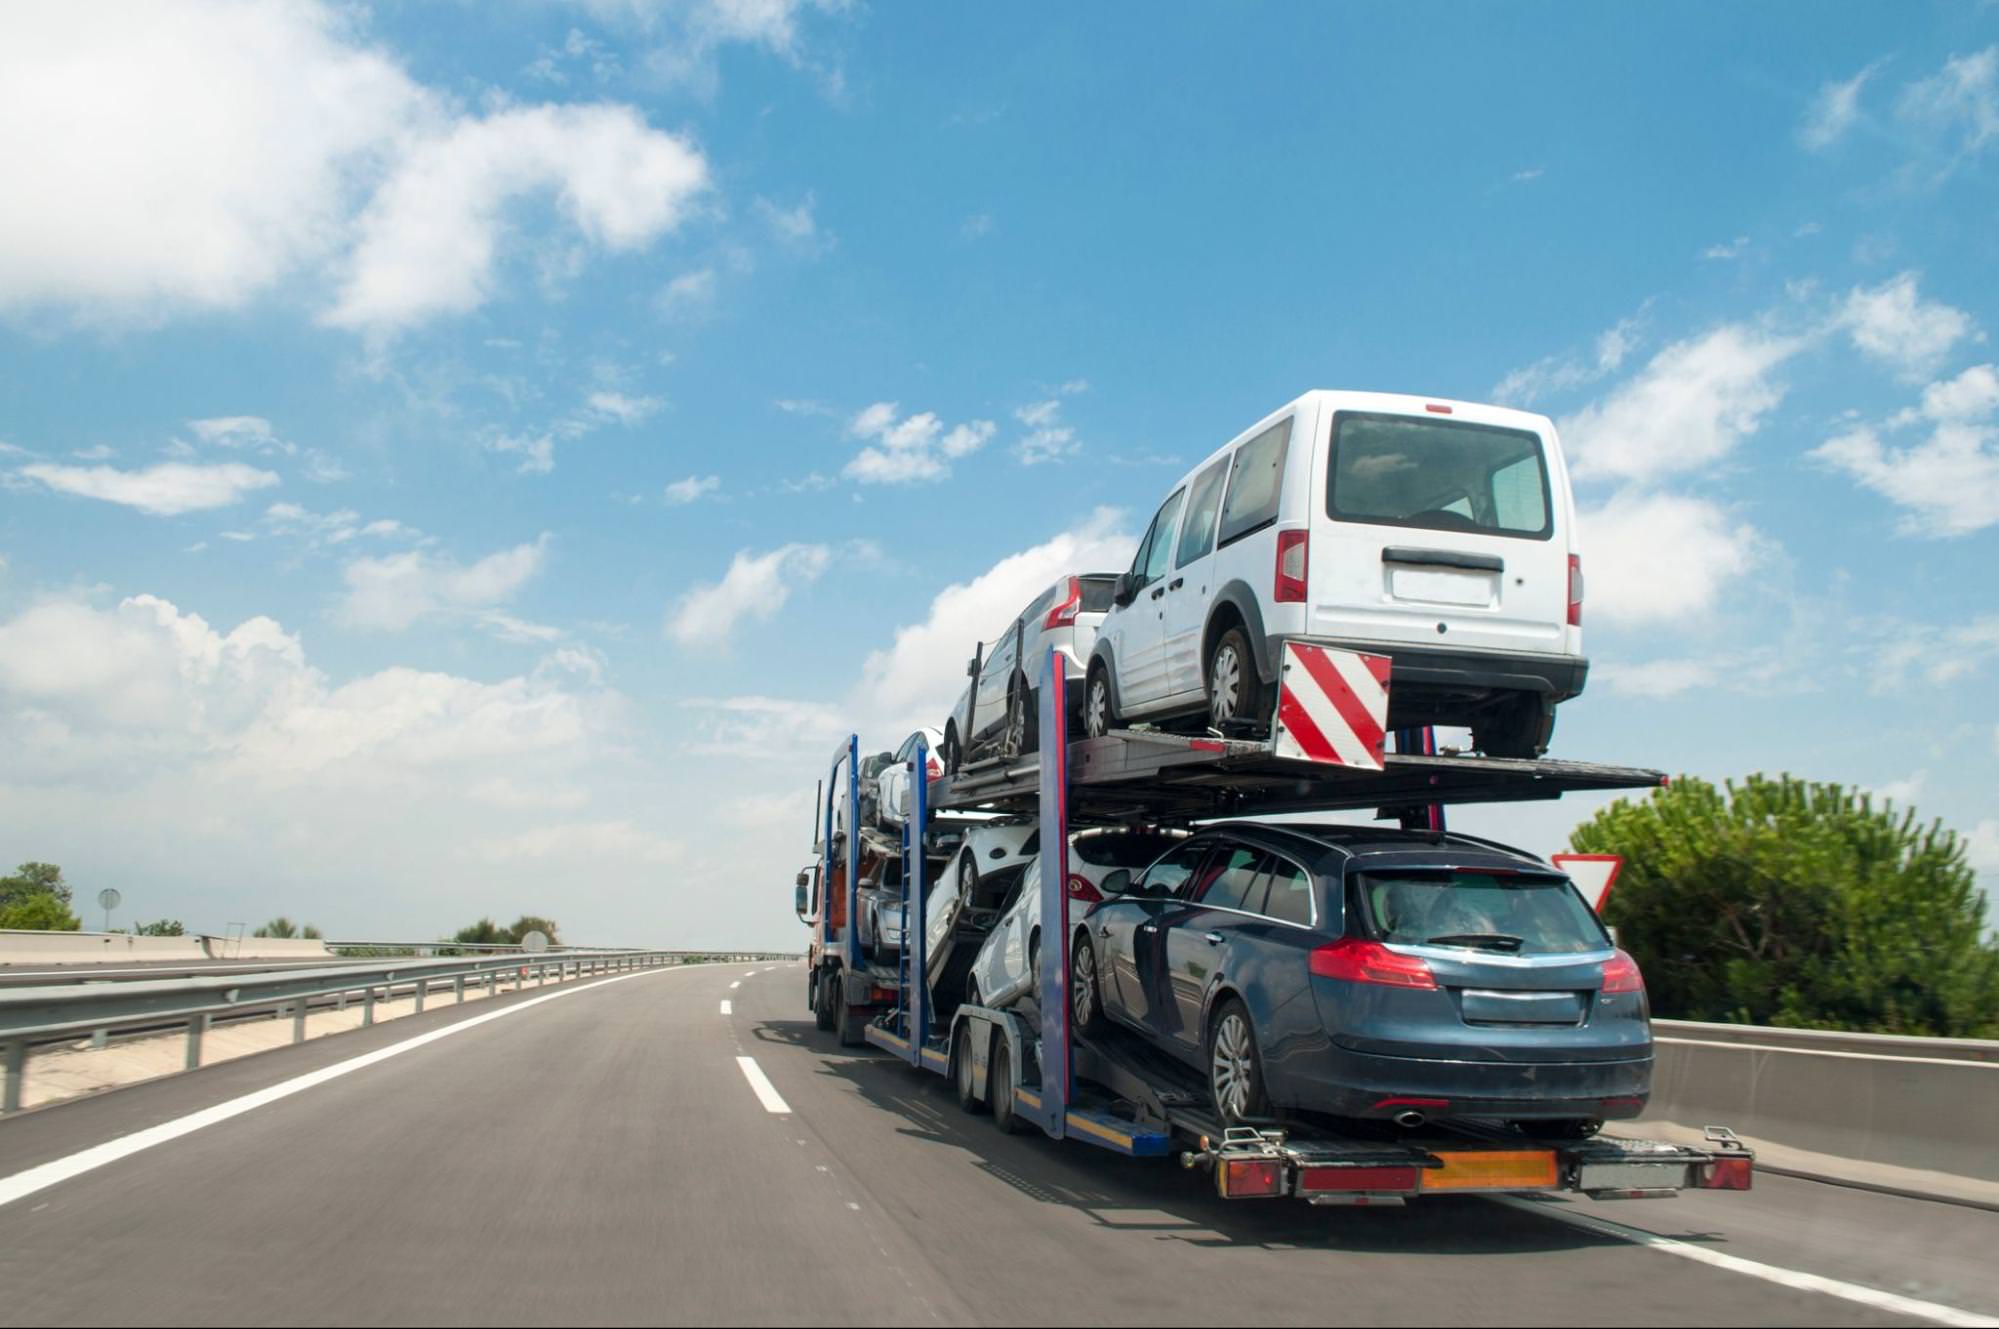 Car transporter carrying multiple vehicles on a highway, representing the shipment of cars from Belgium to Portugal